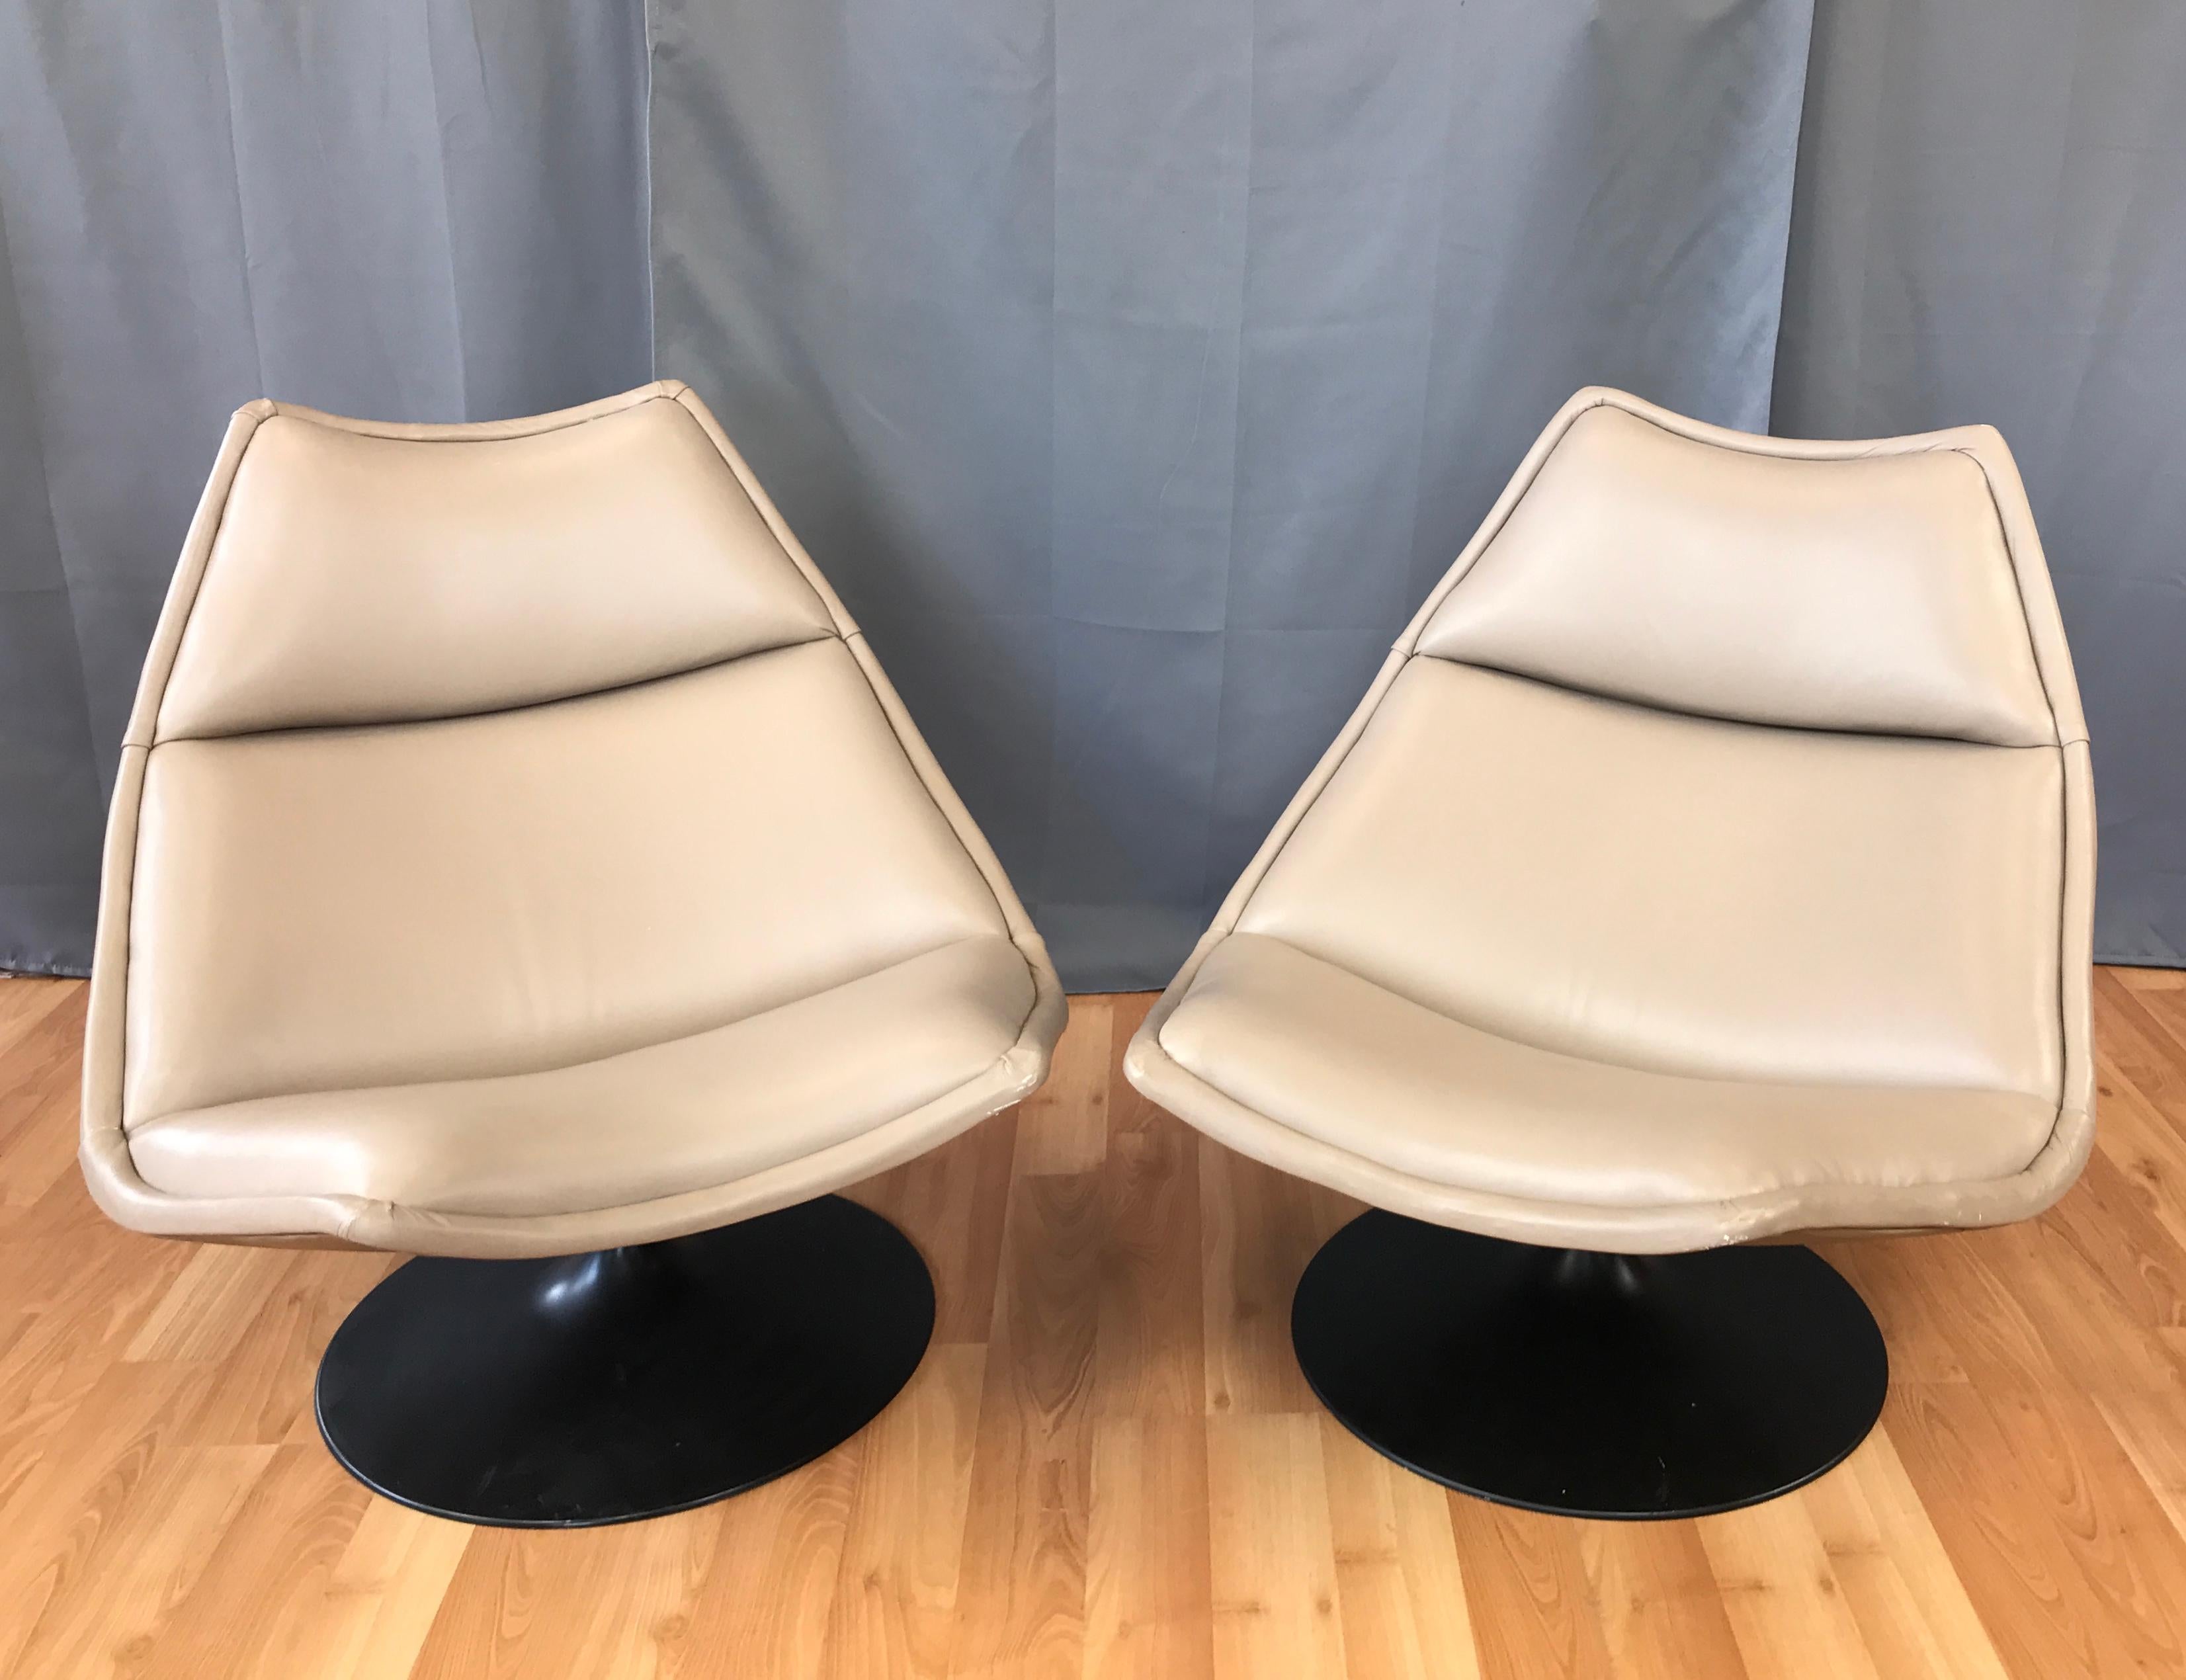 A 1970s pair of F511 leather swivel lounge chairs designed by Geoffrey Harcourt for Artifort in 1967.

The F511 is the shorter-backed companion to the F510, and features a sleekly contemporary, yet supremely comfortable, shell-inspired shape that’s